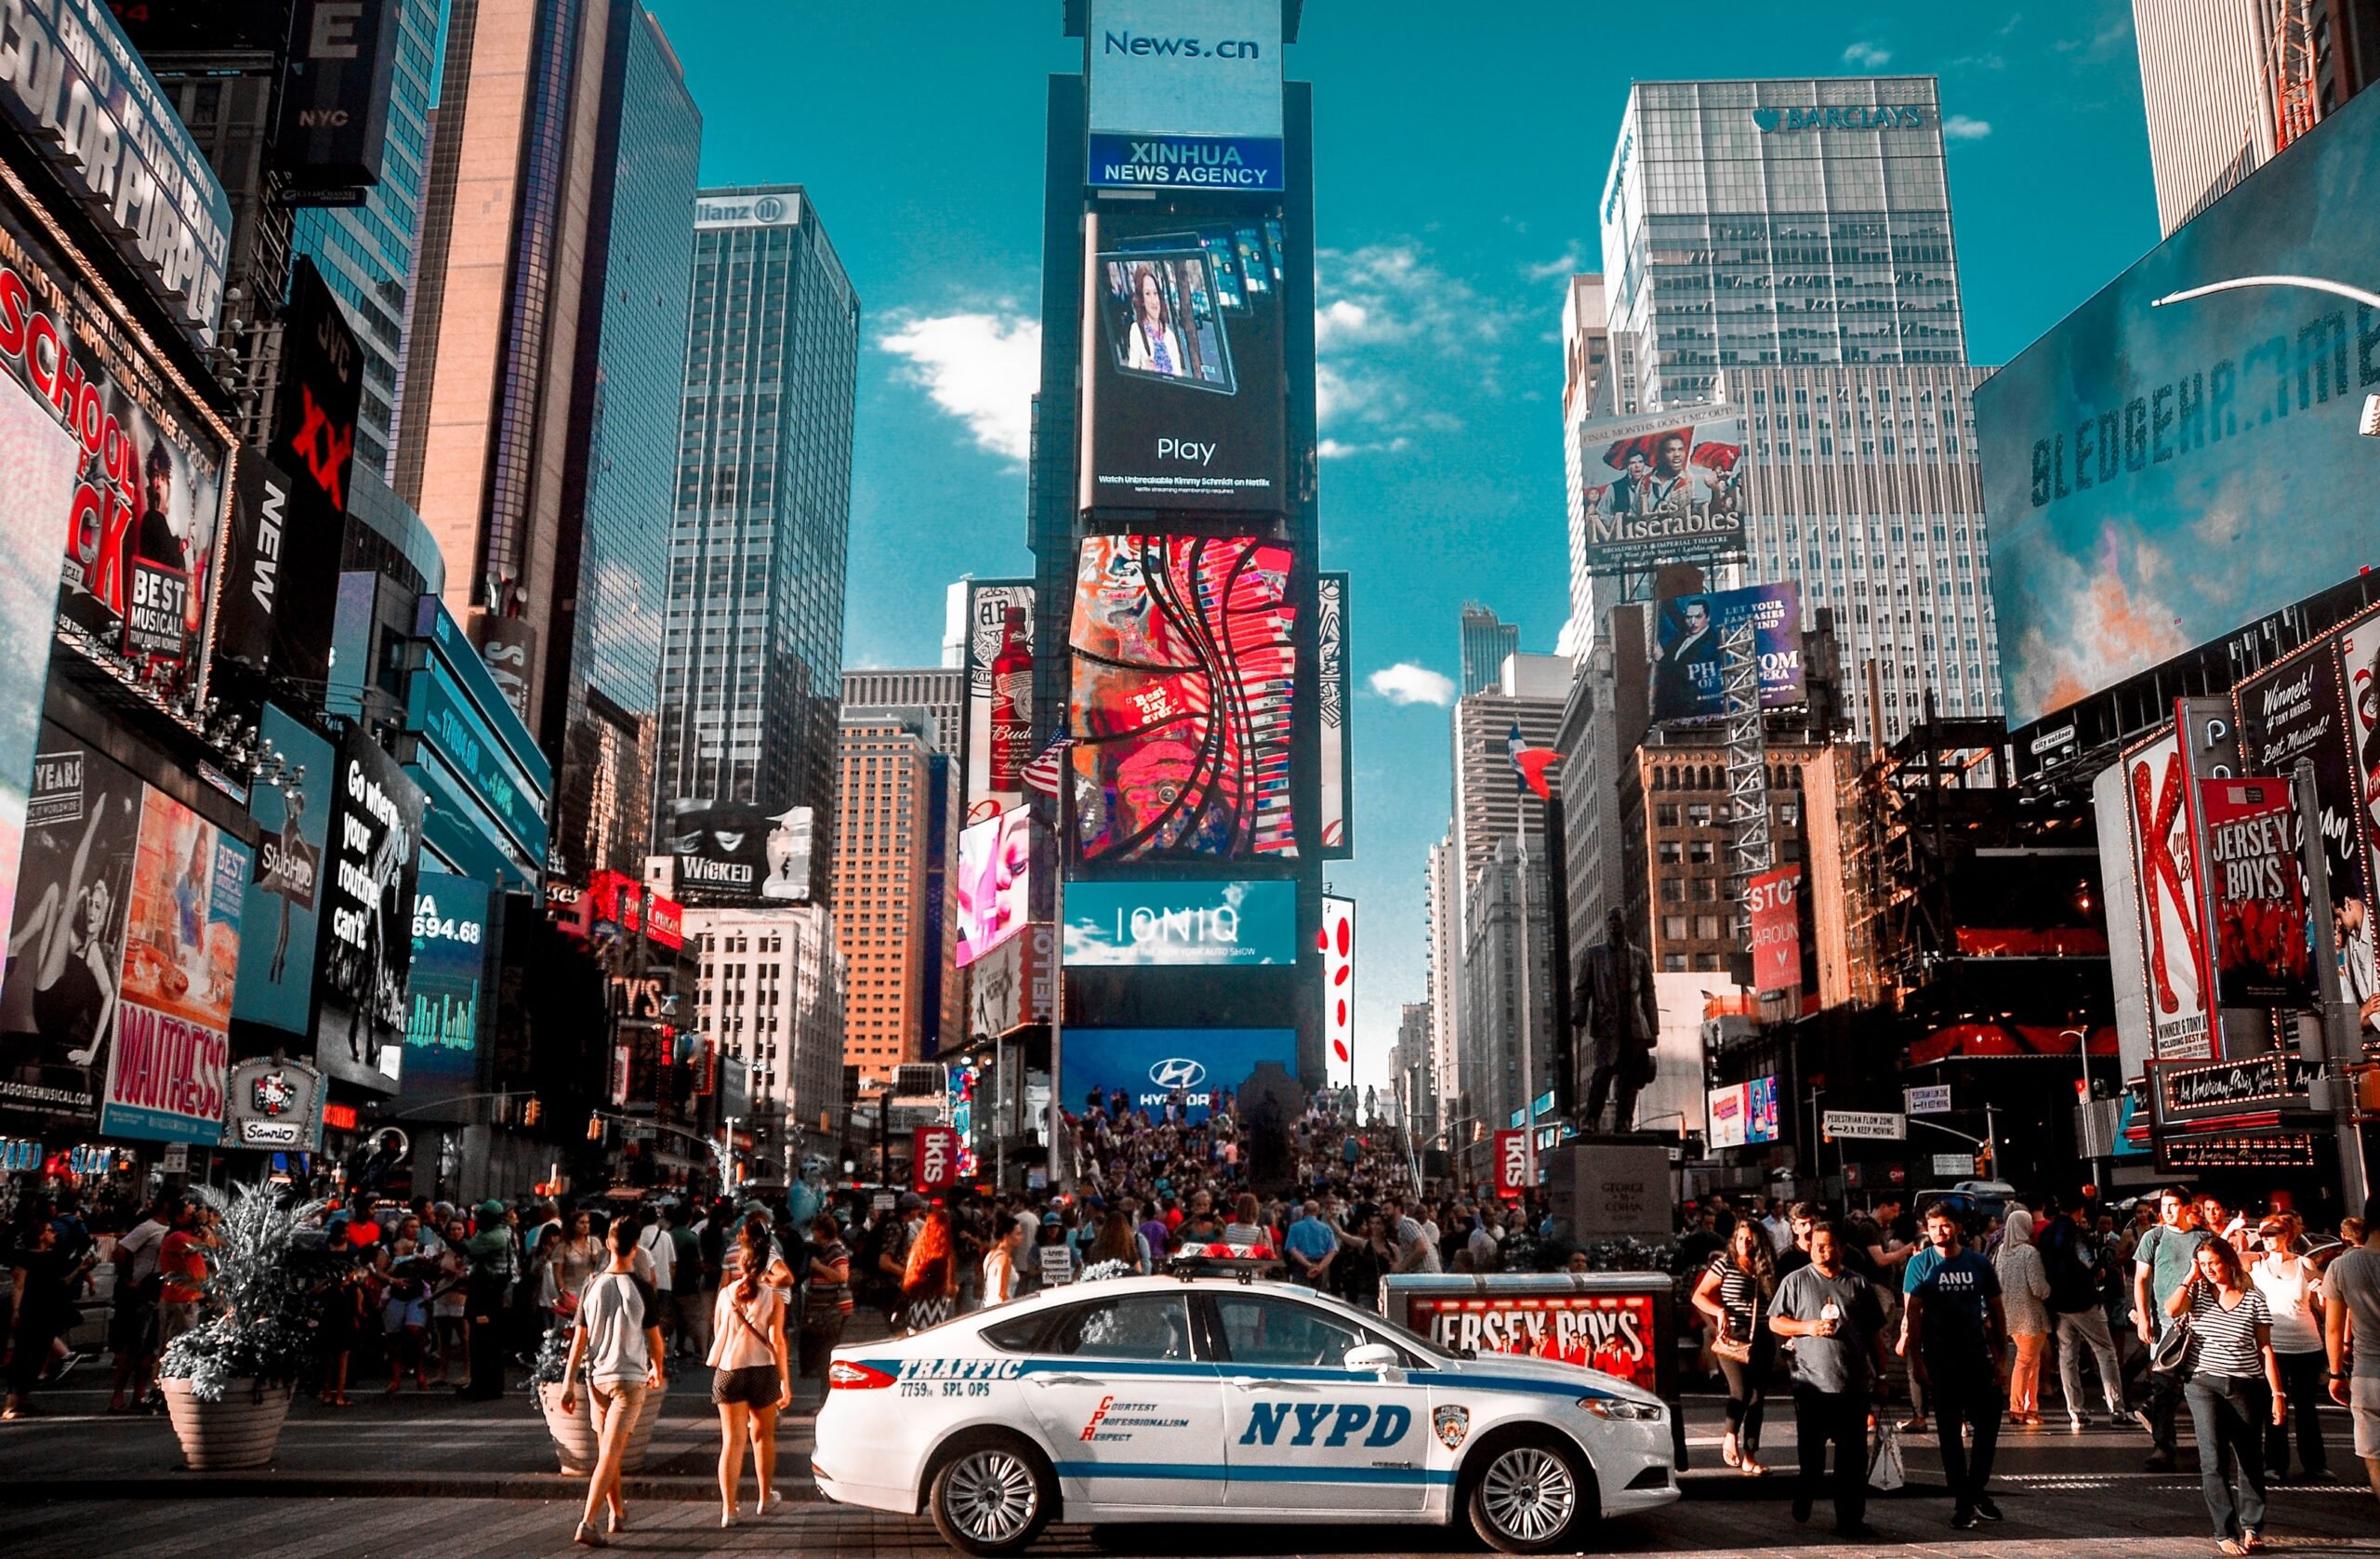 What to do in Times Square, New York